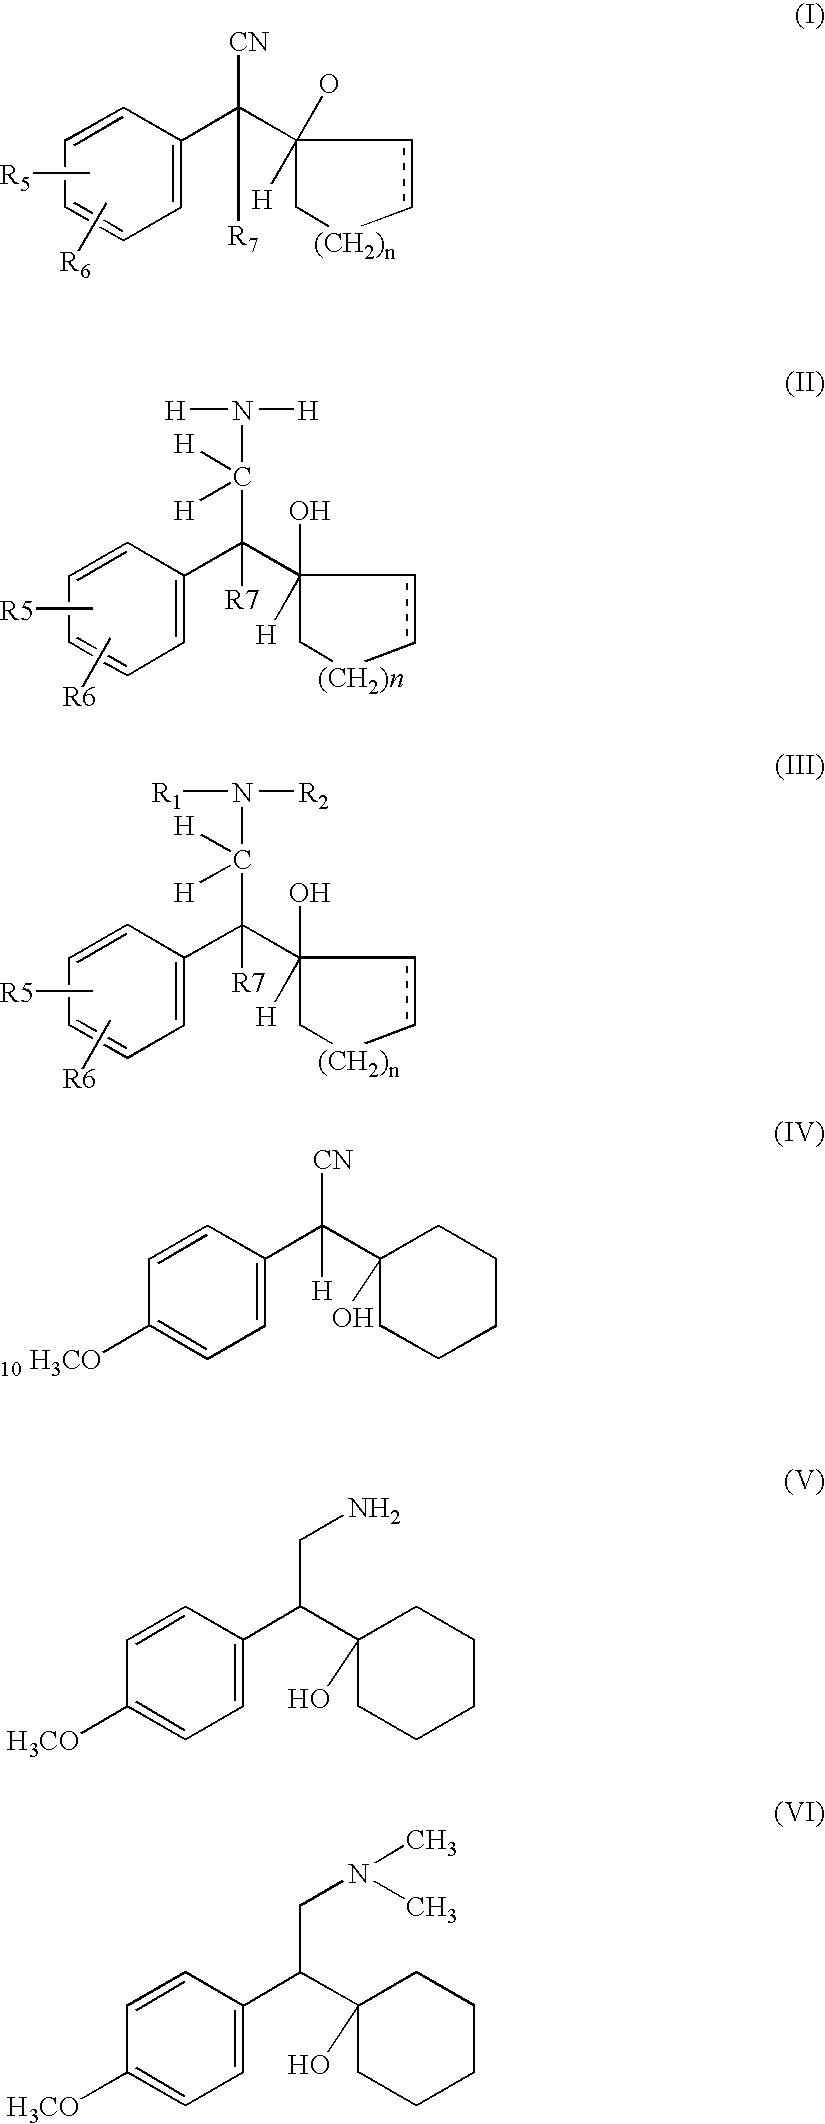 Manufacture of phenyl ethylamine compounds, in particular venlafaxine